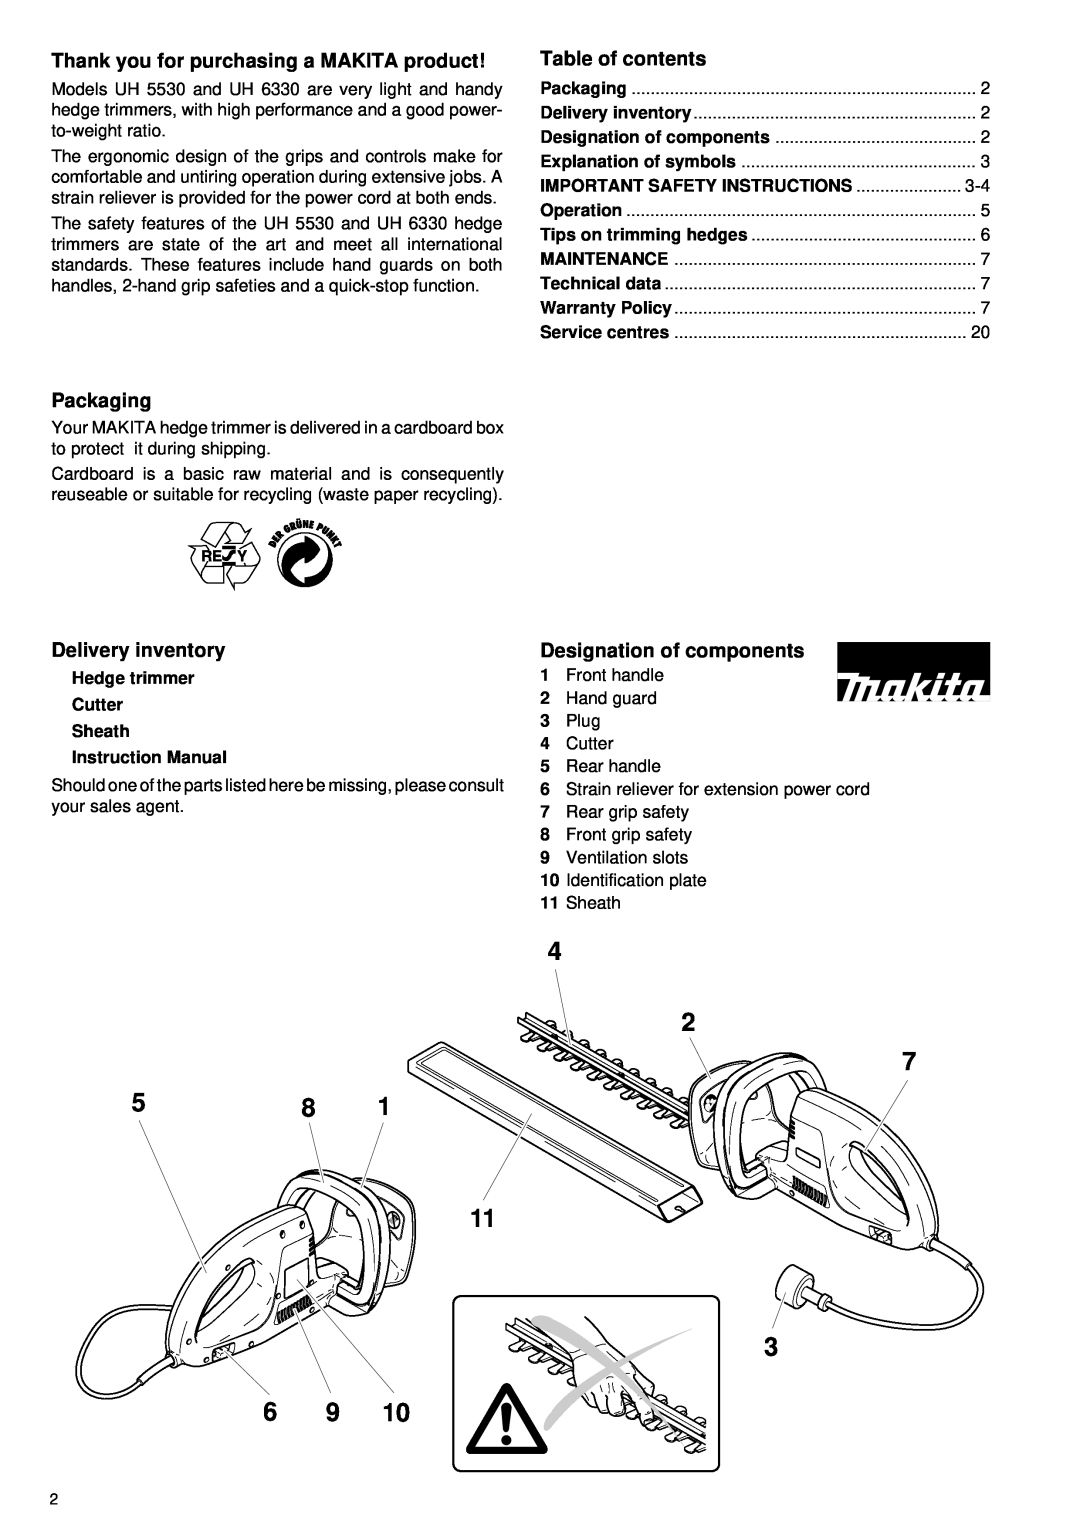 Makita UH 5530, UH 6330 manual Thank you for purchasing a MAKITA product, Packaging, Table of contents, Delivery inventory 